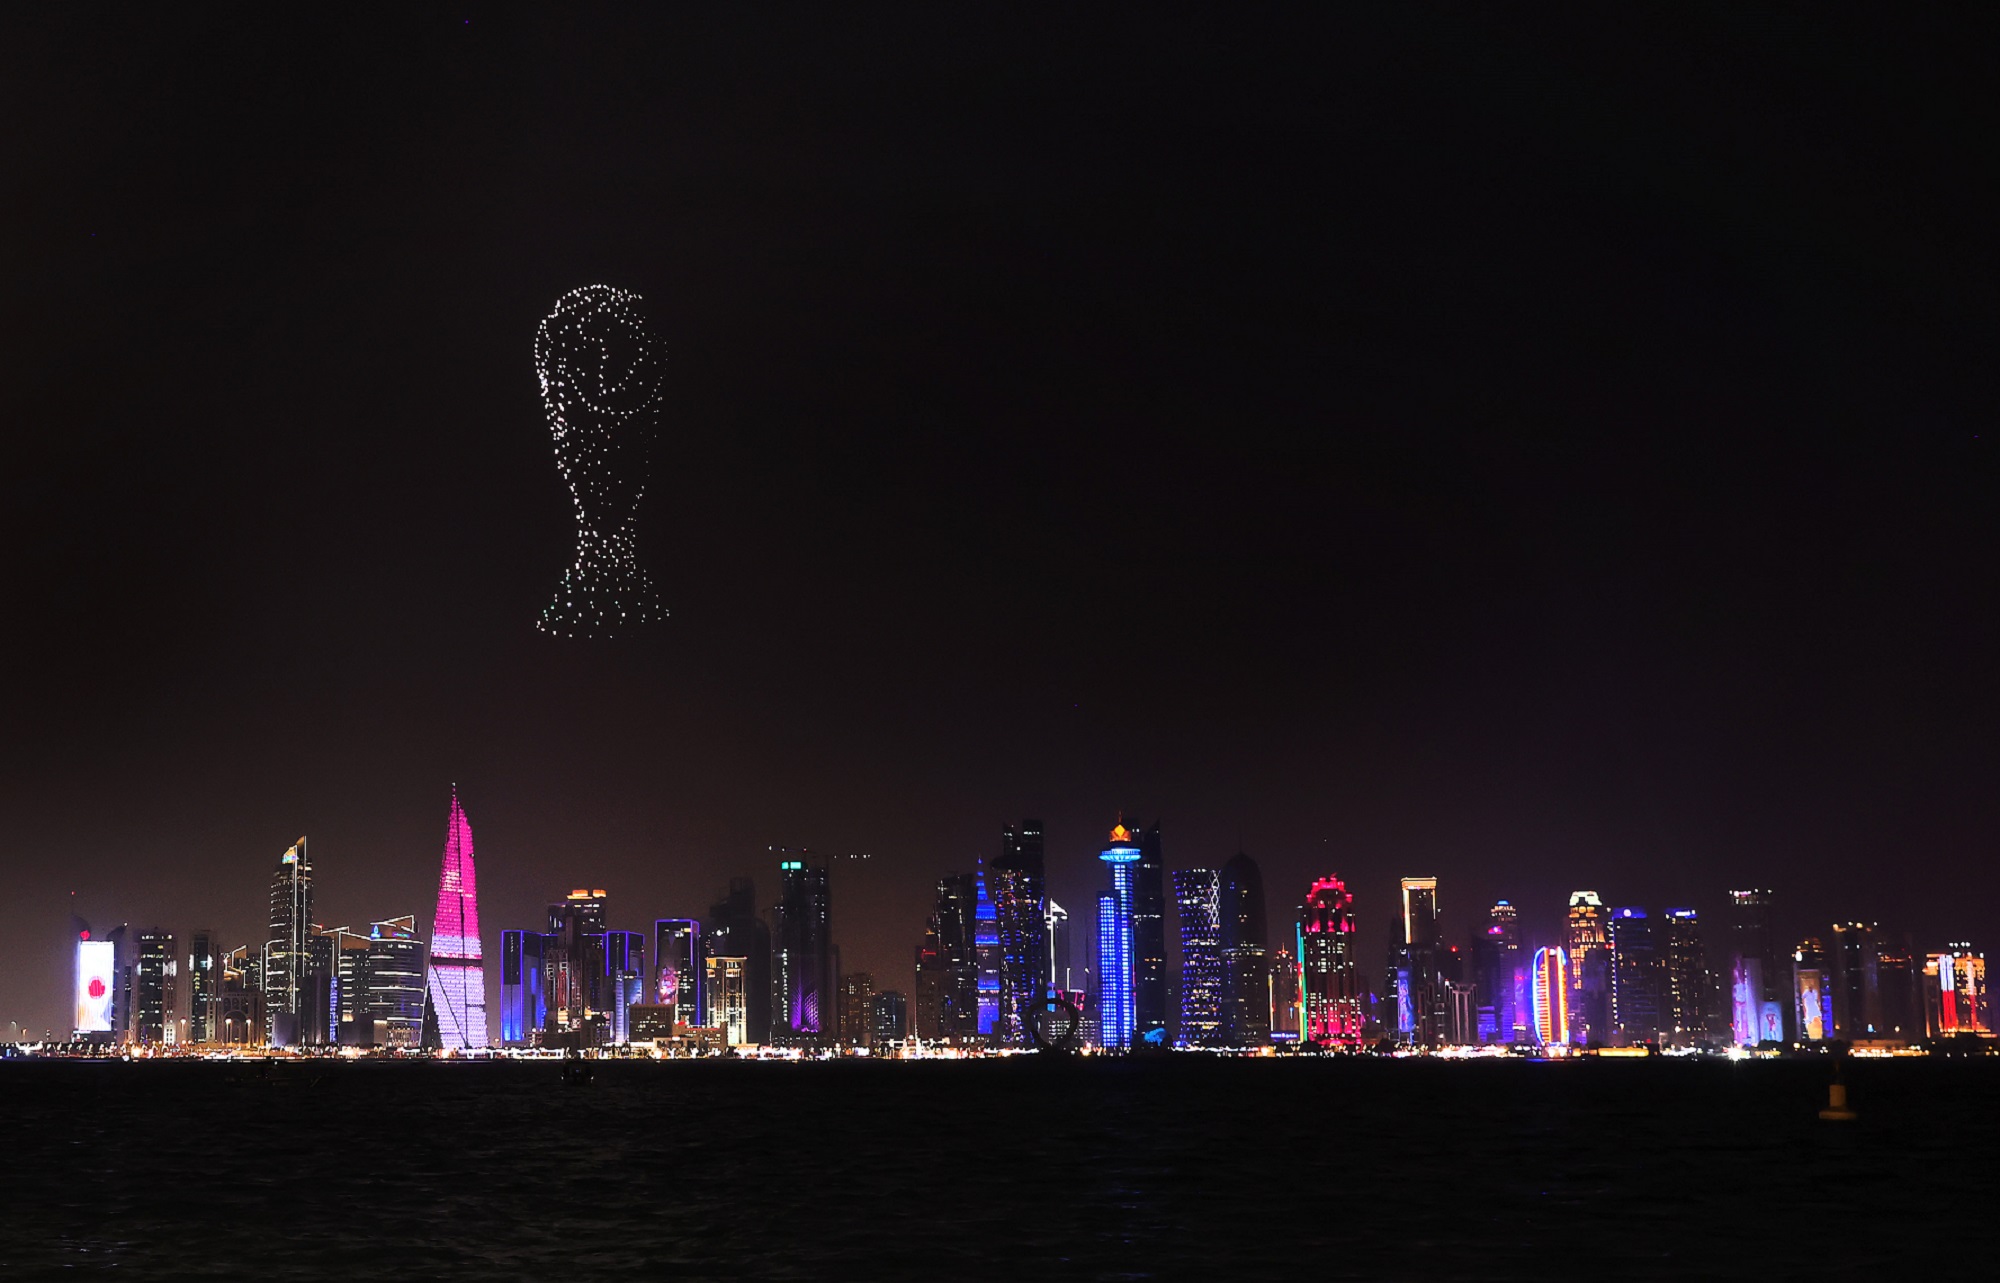 Light show in the night sky over a brightly lit Doha, Qatar during the 2022 World Cup